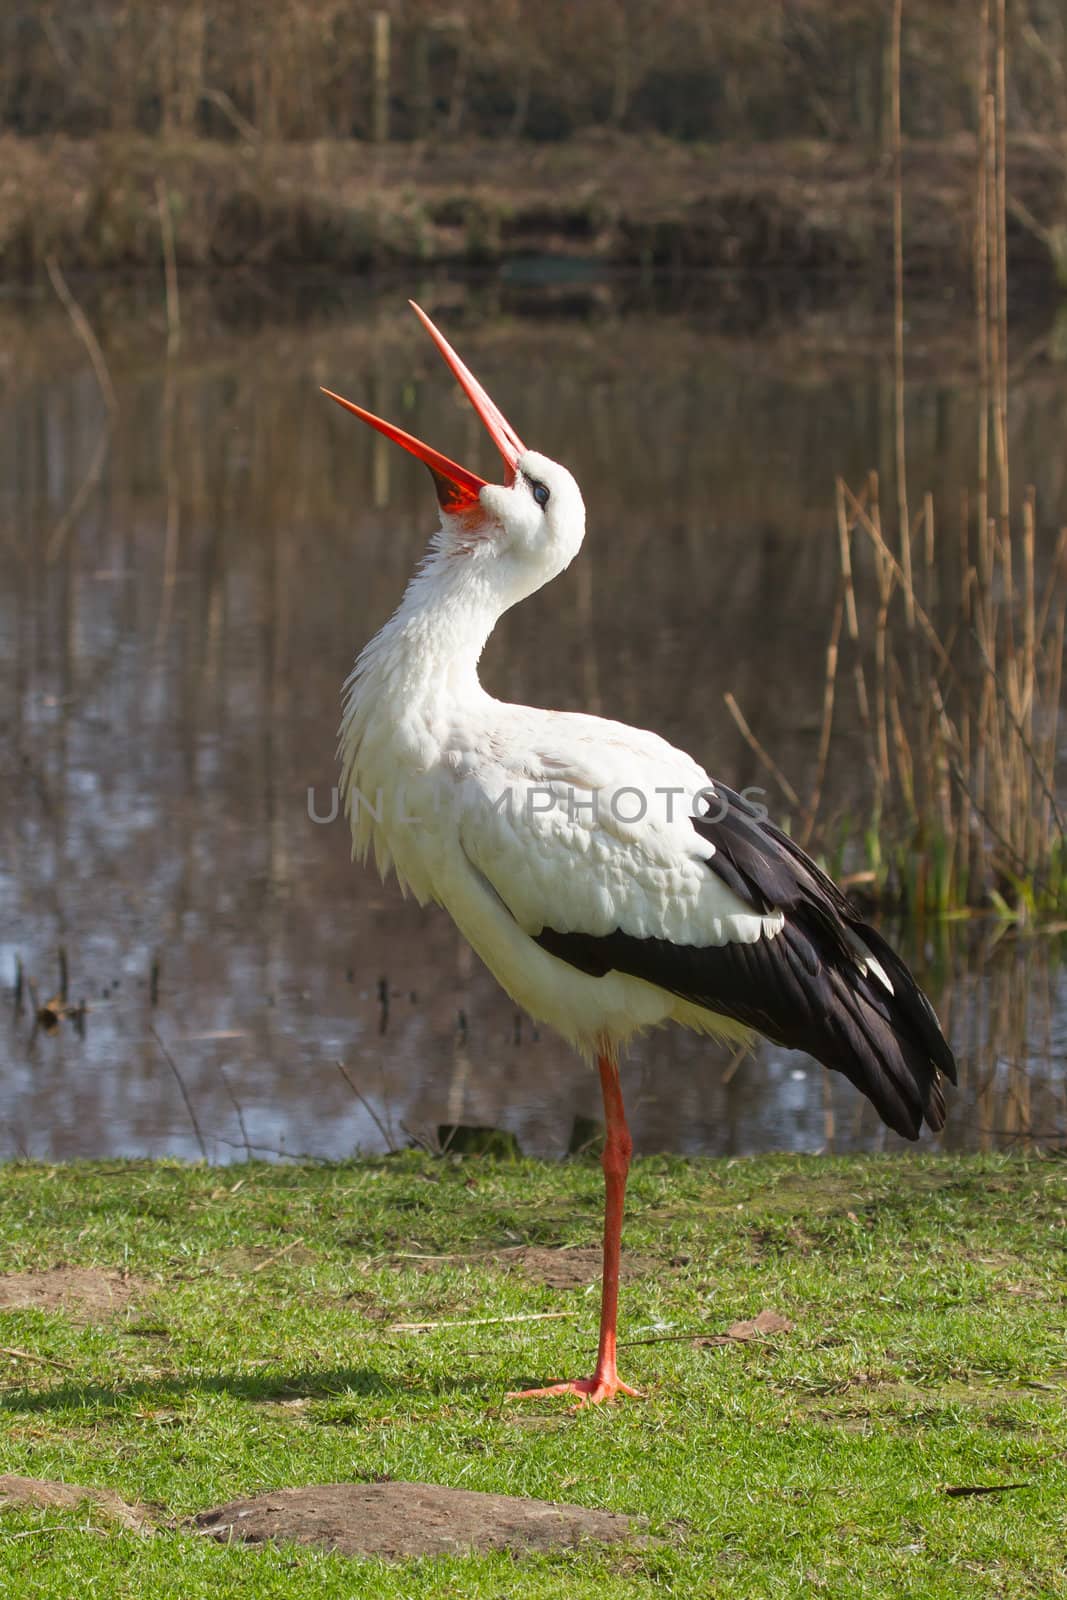 A stork in its natural habitat by michaklootwijk